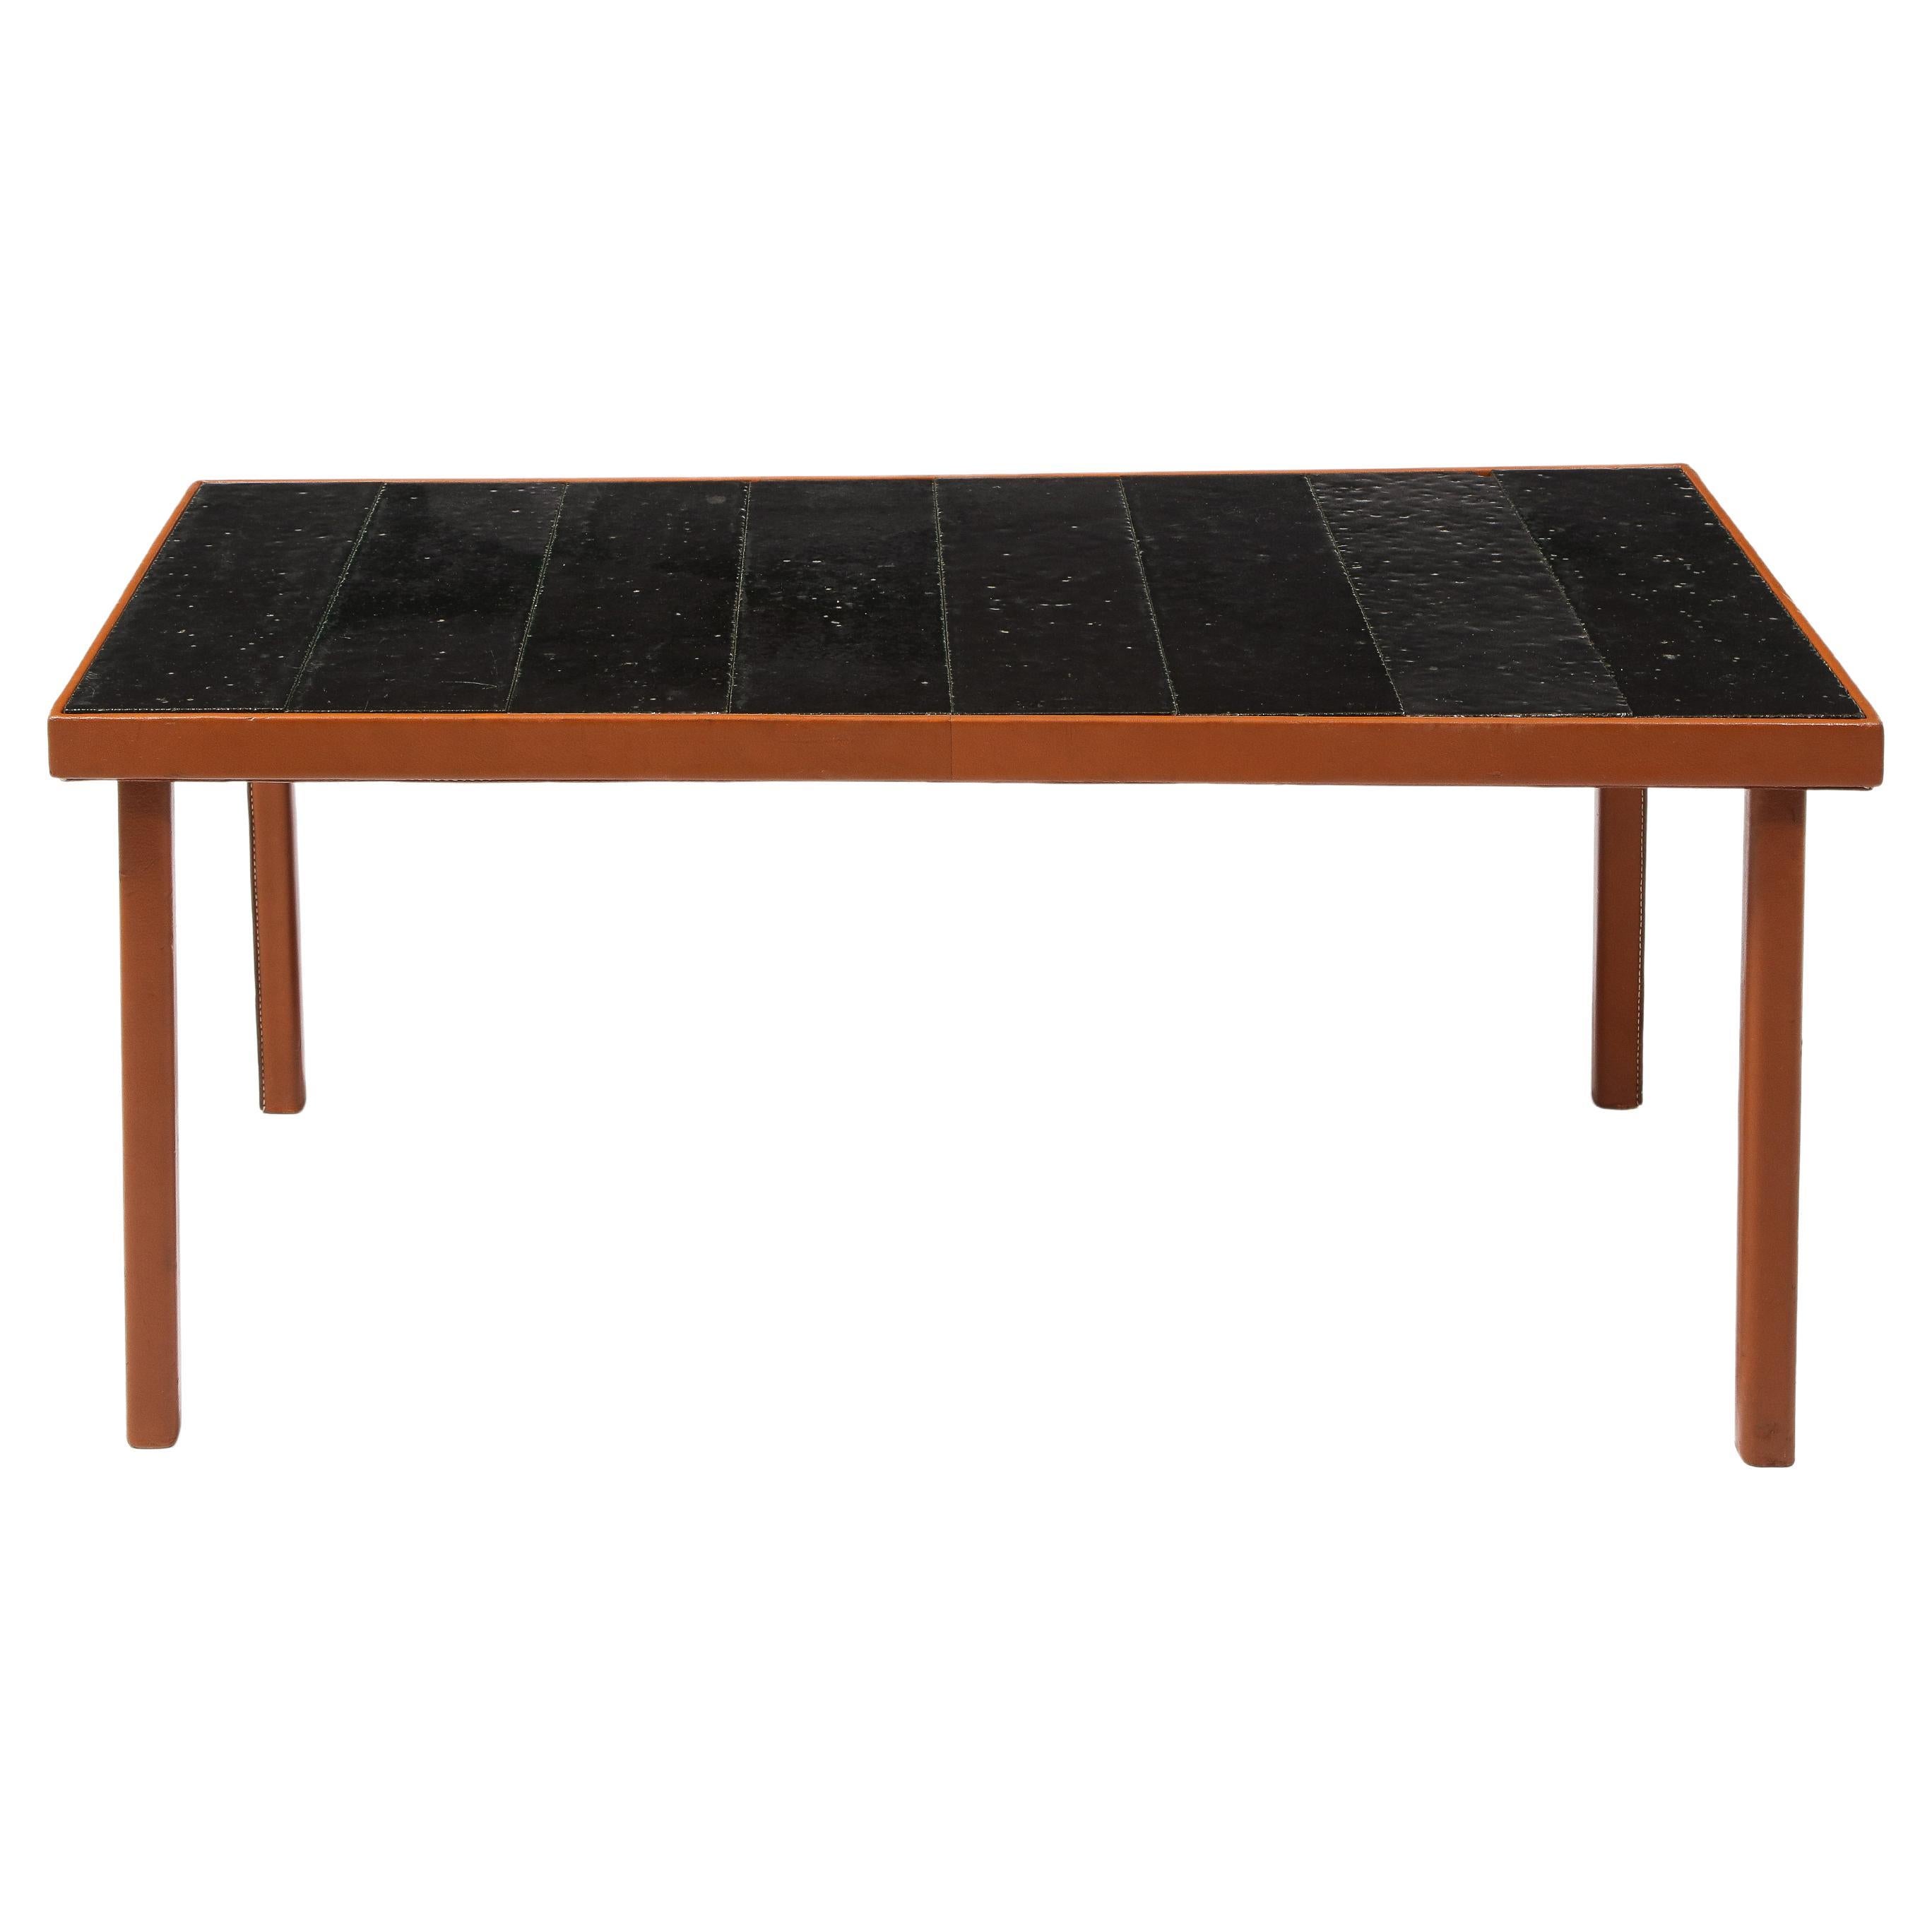 Jacques Adnet Leather and Dark Jouve-like Lava Stone Tile Table, France 1950's